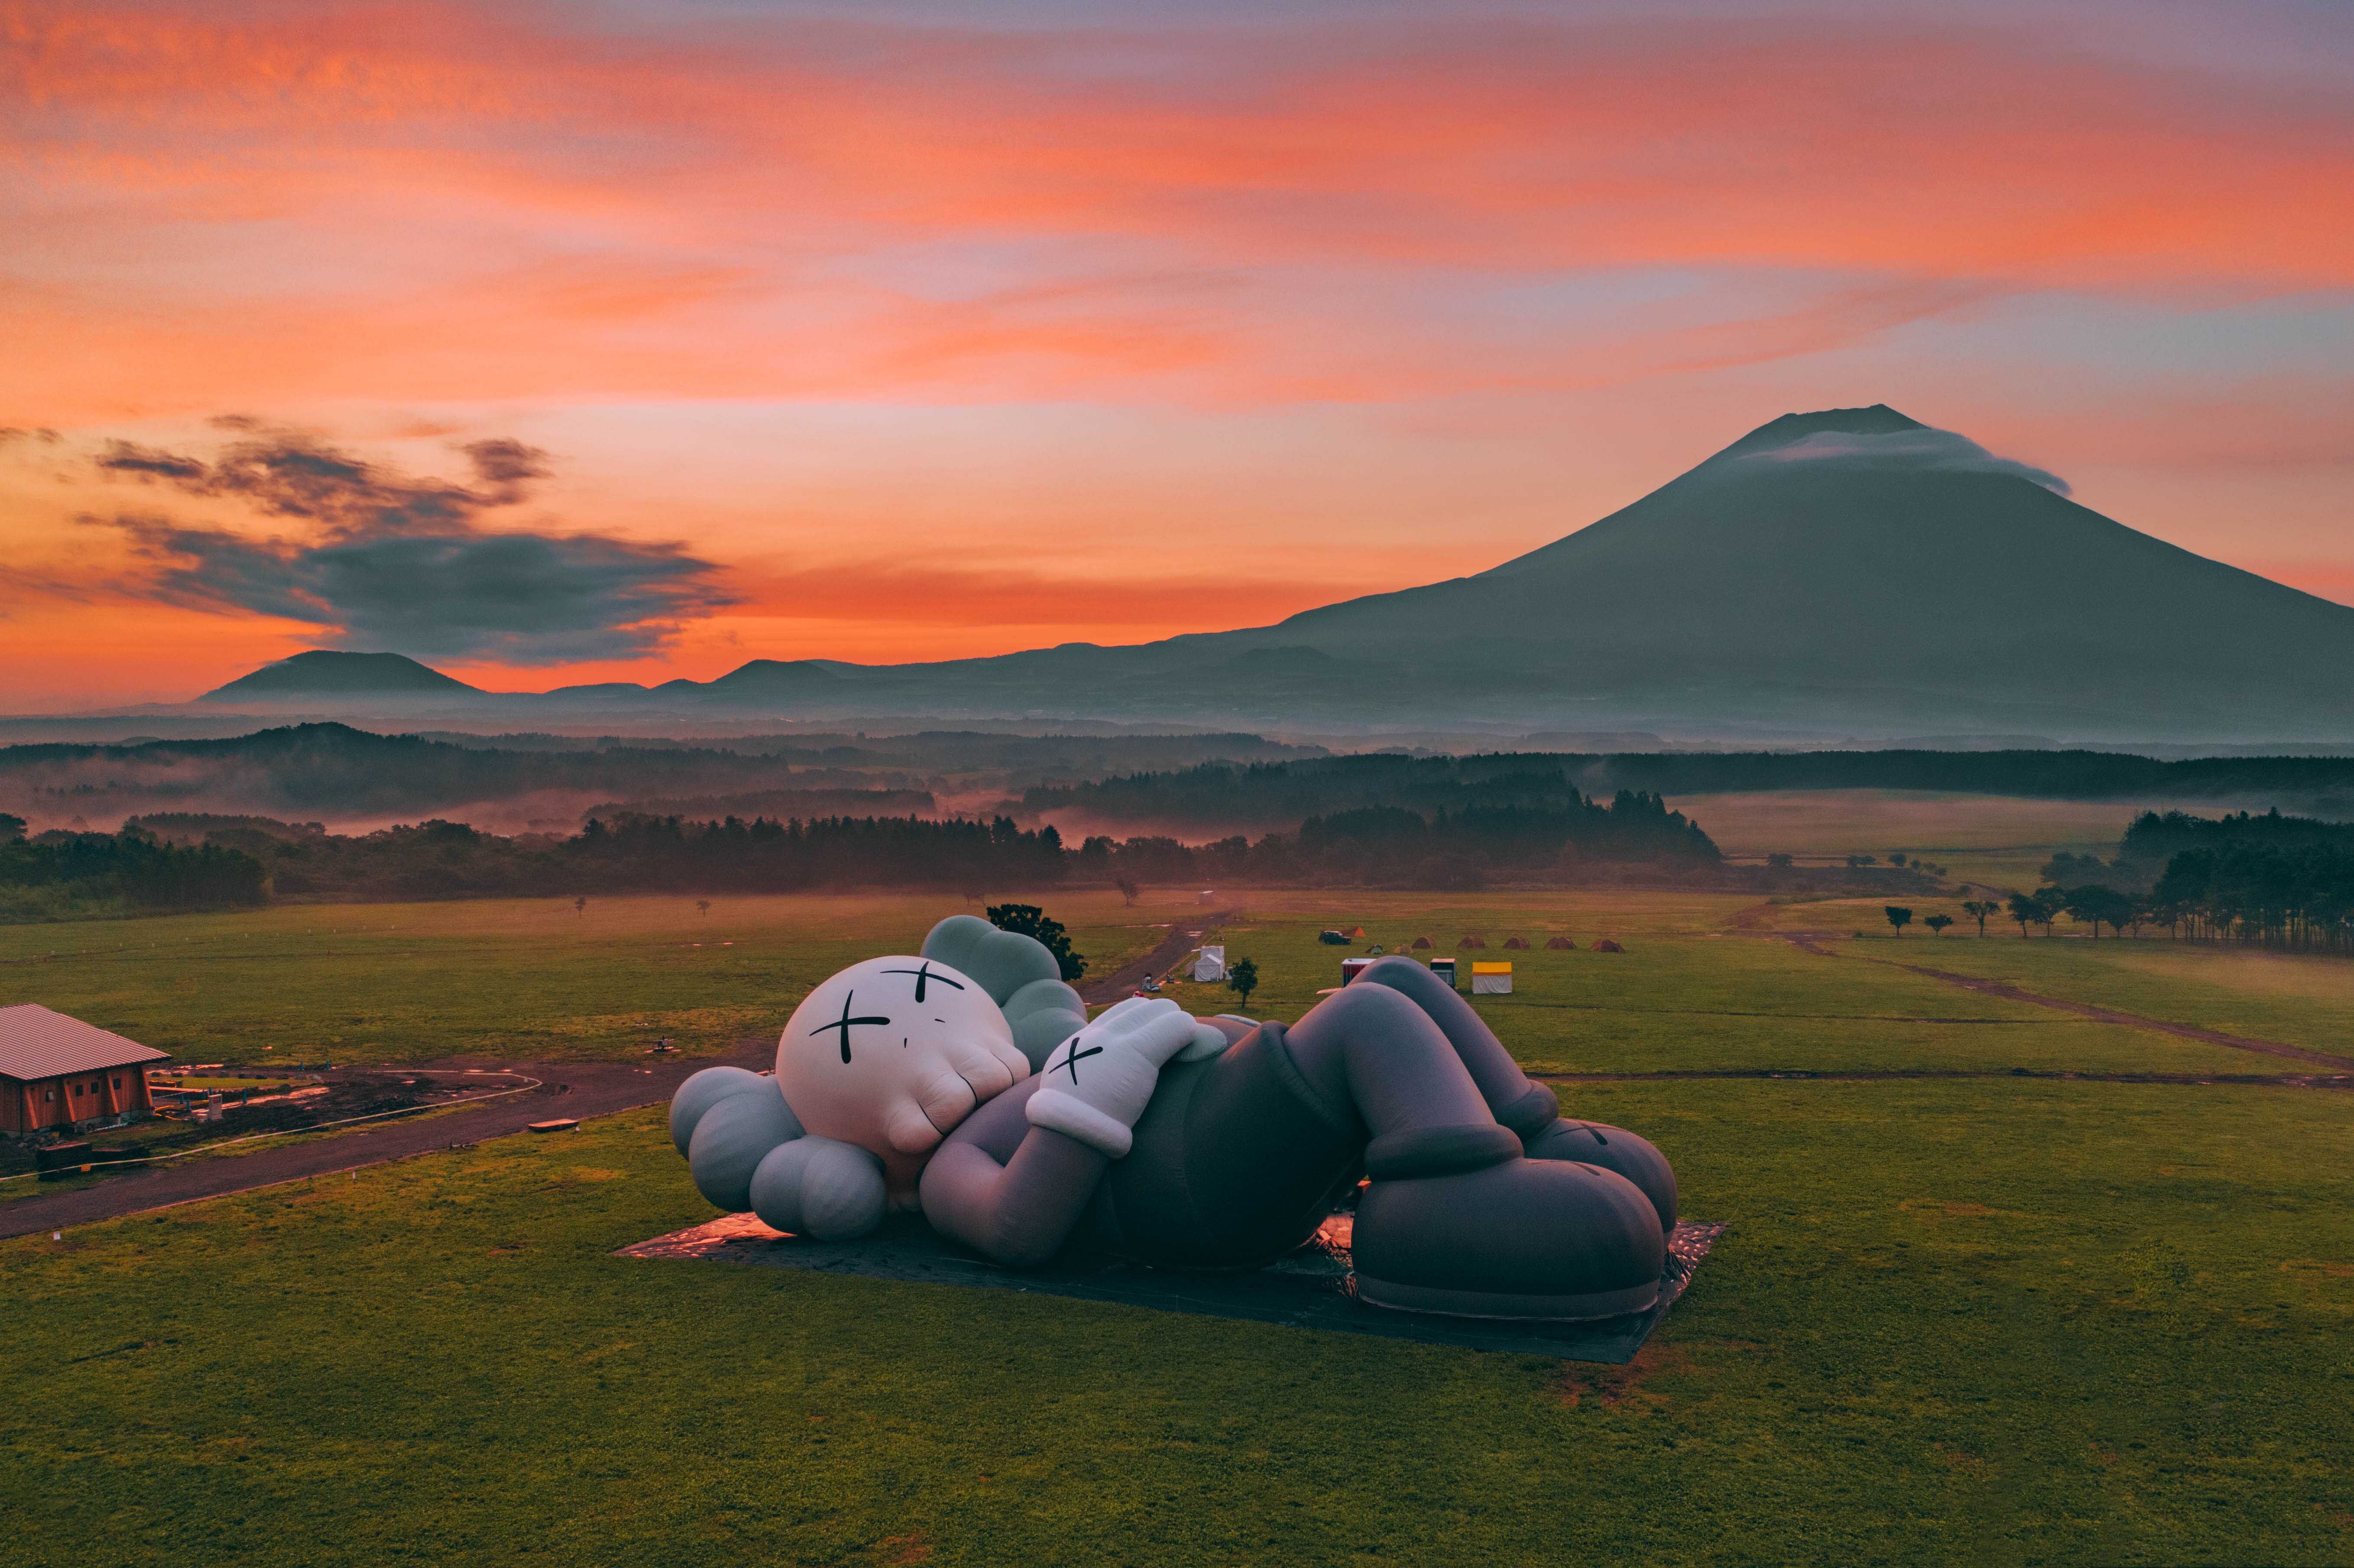 Next stop for "Kaws: Holiday" is Mount Fuji — Hashtag Legend